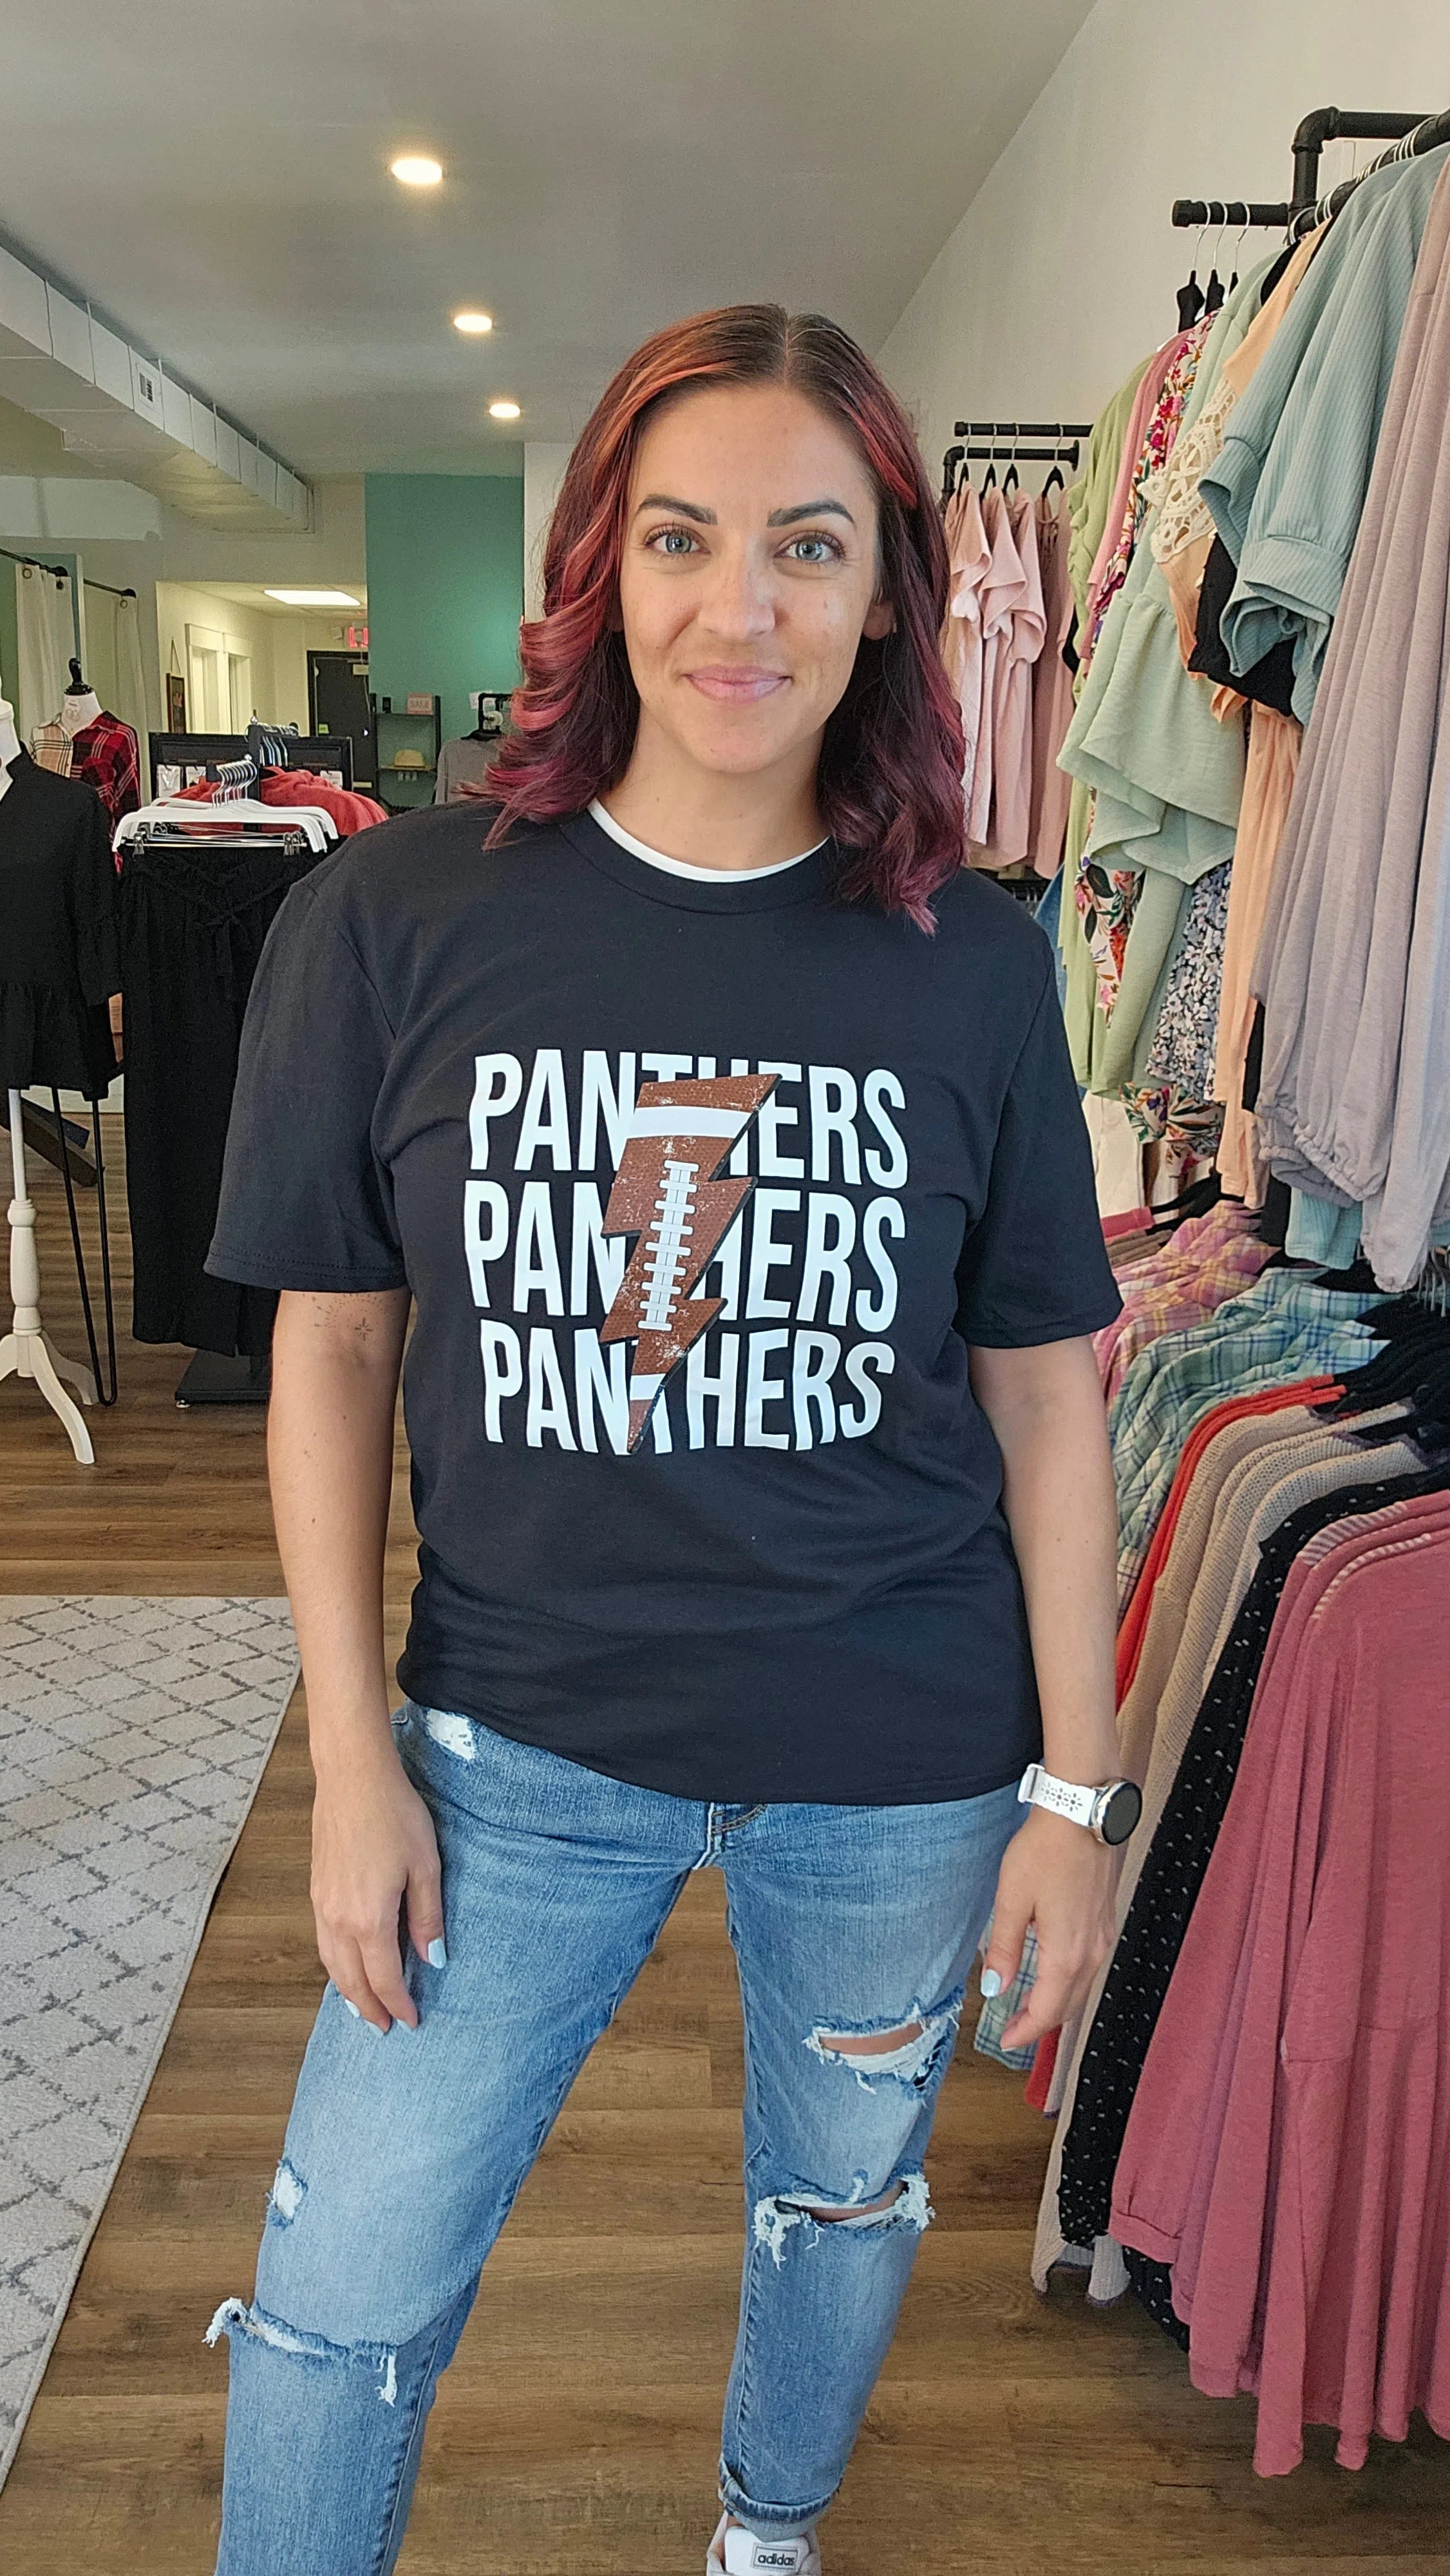 Shop Pickerington Football Lightning Tee - Panthers or Tigers-Graphic Tee at Ruby Joy Boutique, a Women's Clothing Store in Pickerington, Ohio